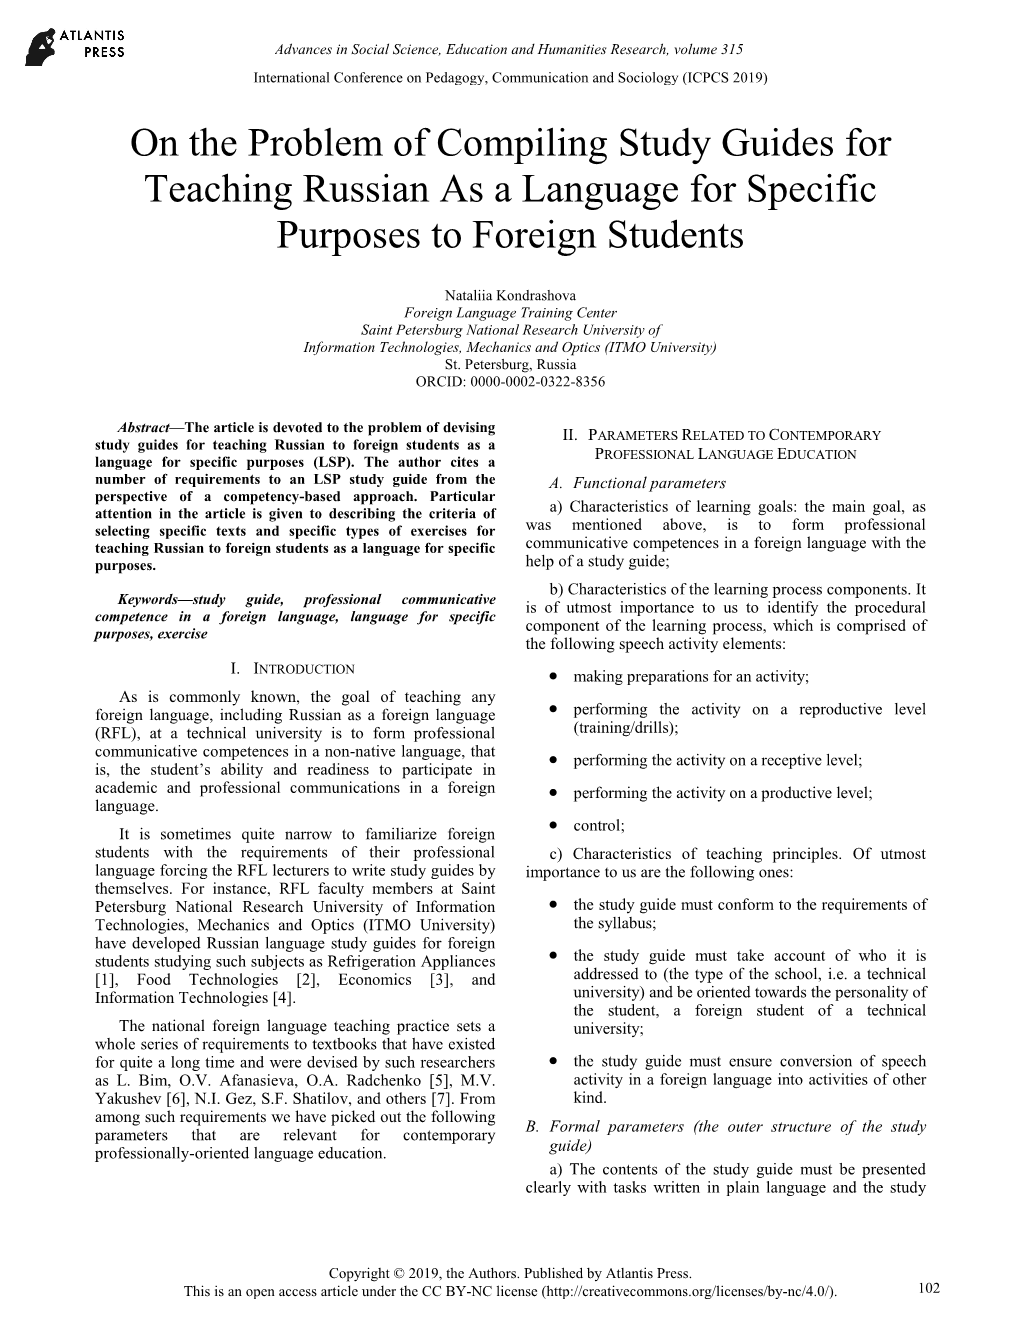 On the Problem of Compiling Study Guides for Teaching Russian As a Language for Specific Purposes to Foreign Students